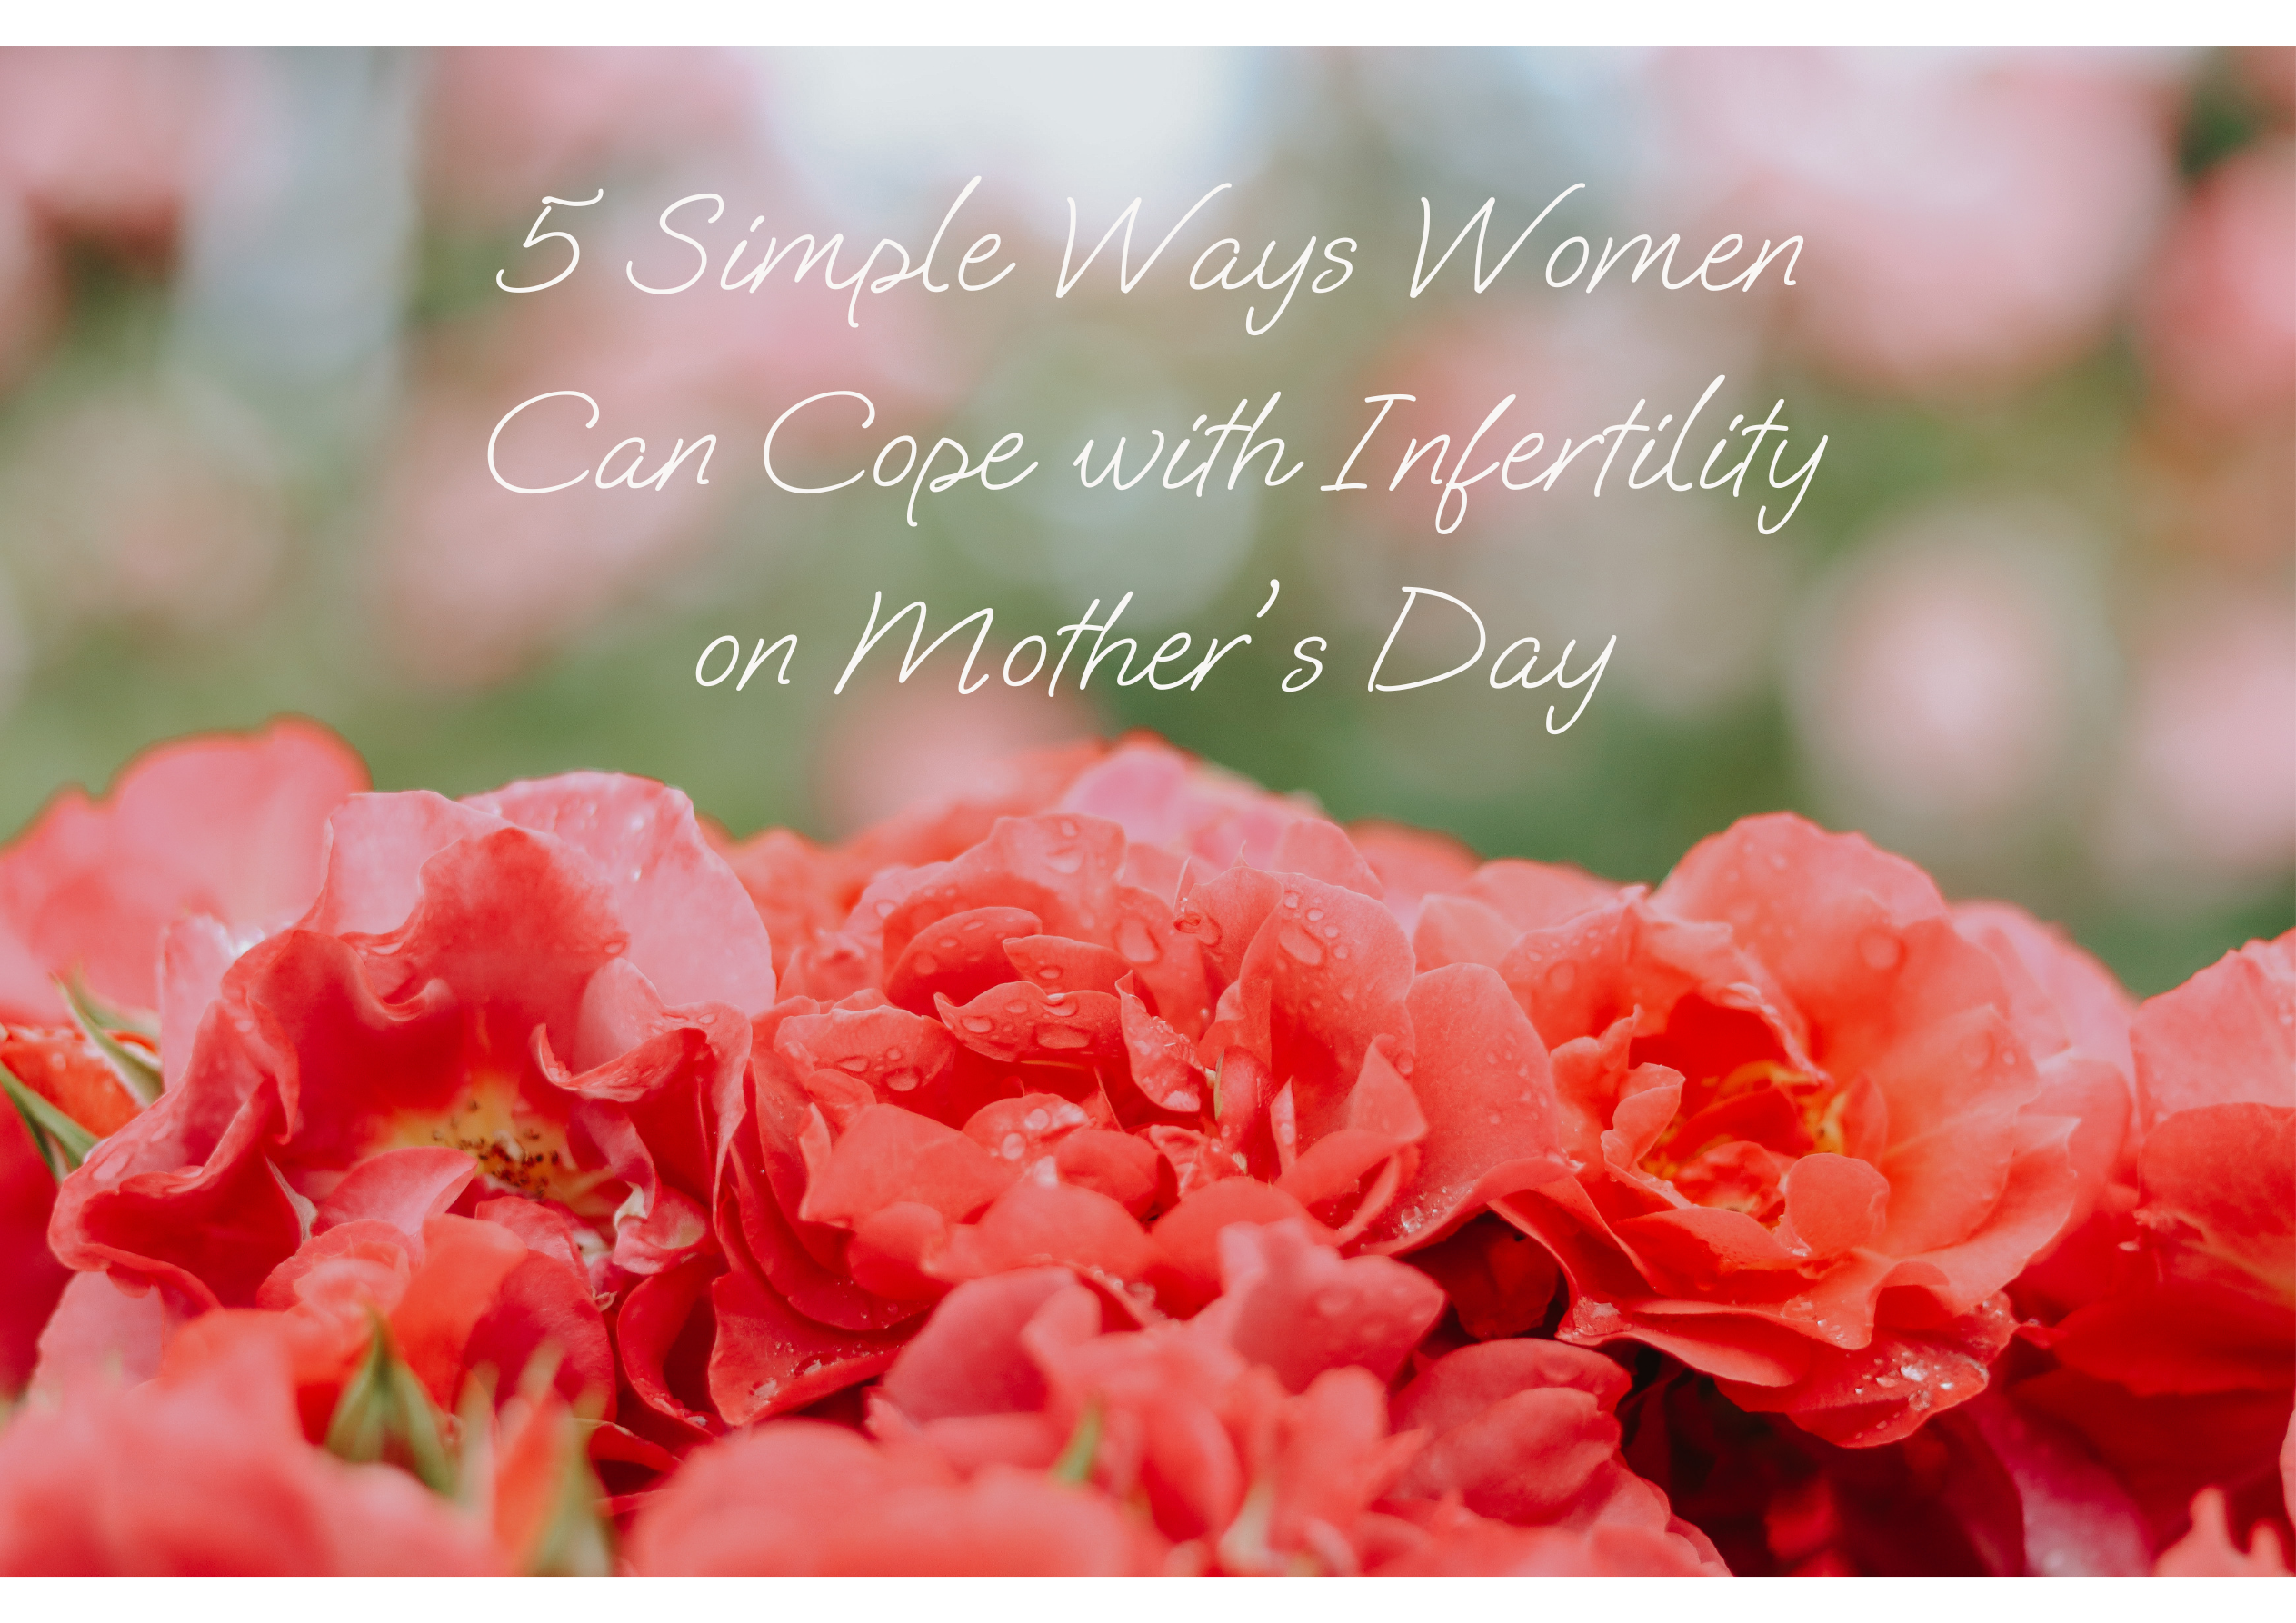 5 Simple Ways Women Can Cope with Infertility on Mother’s Day